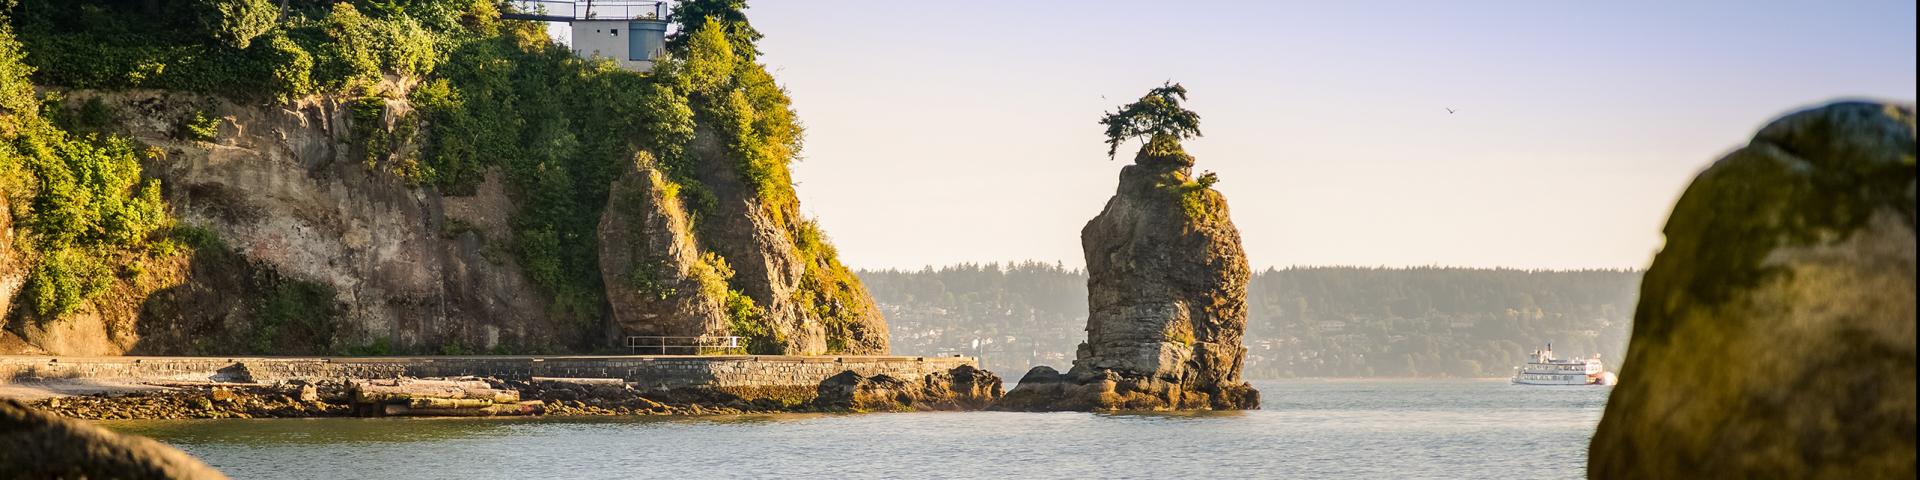 Top 7 things for visitors to do in Vancouver during the Spring